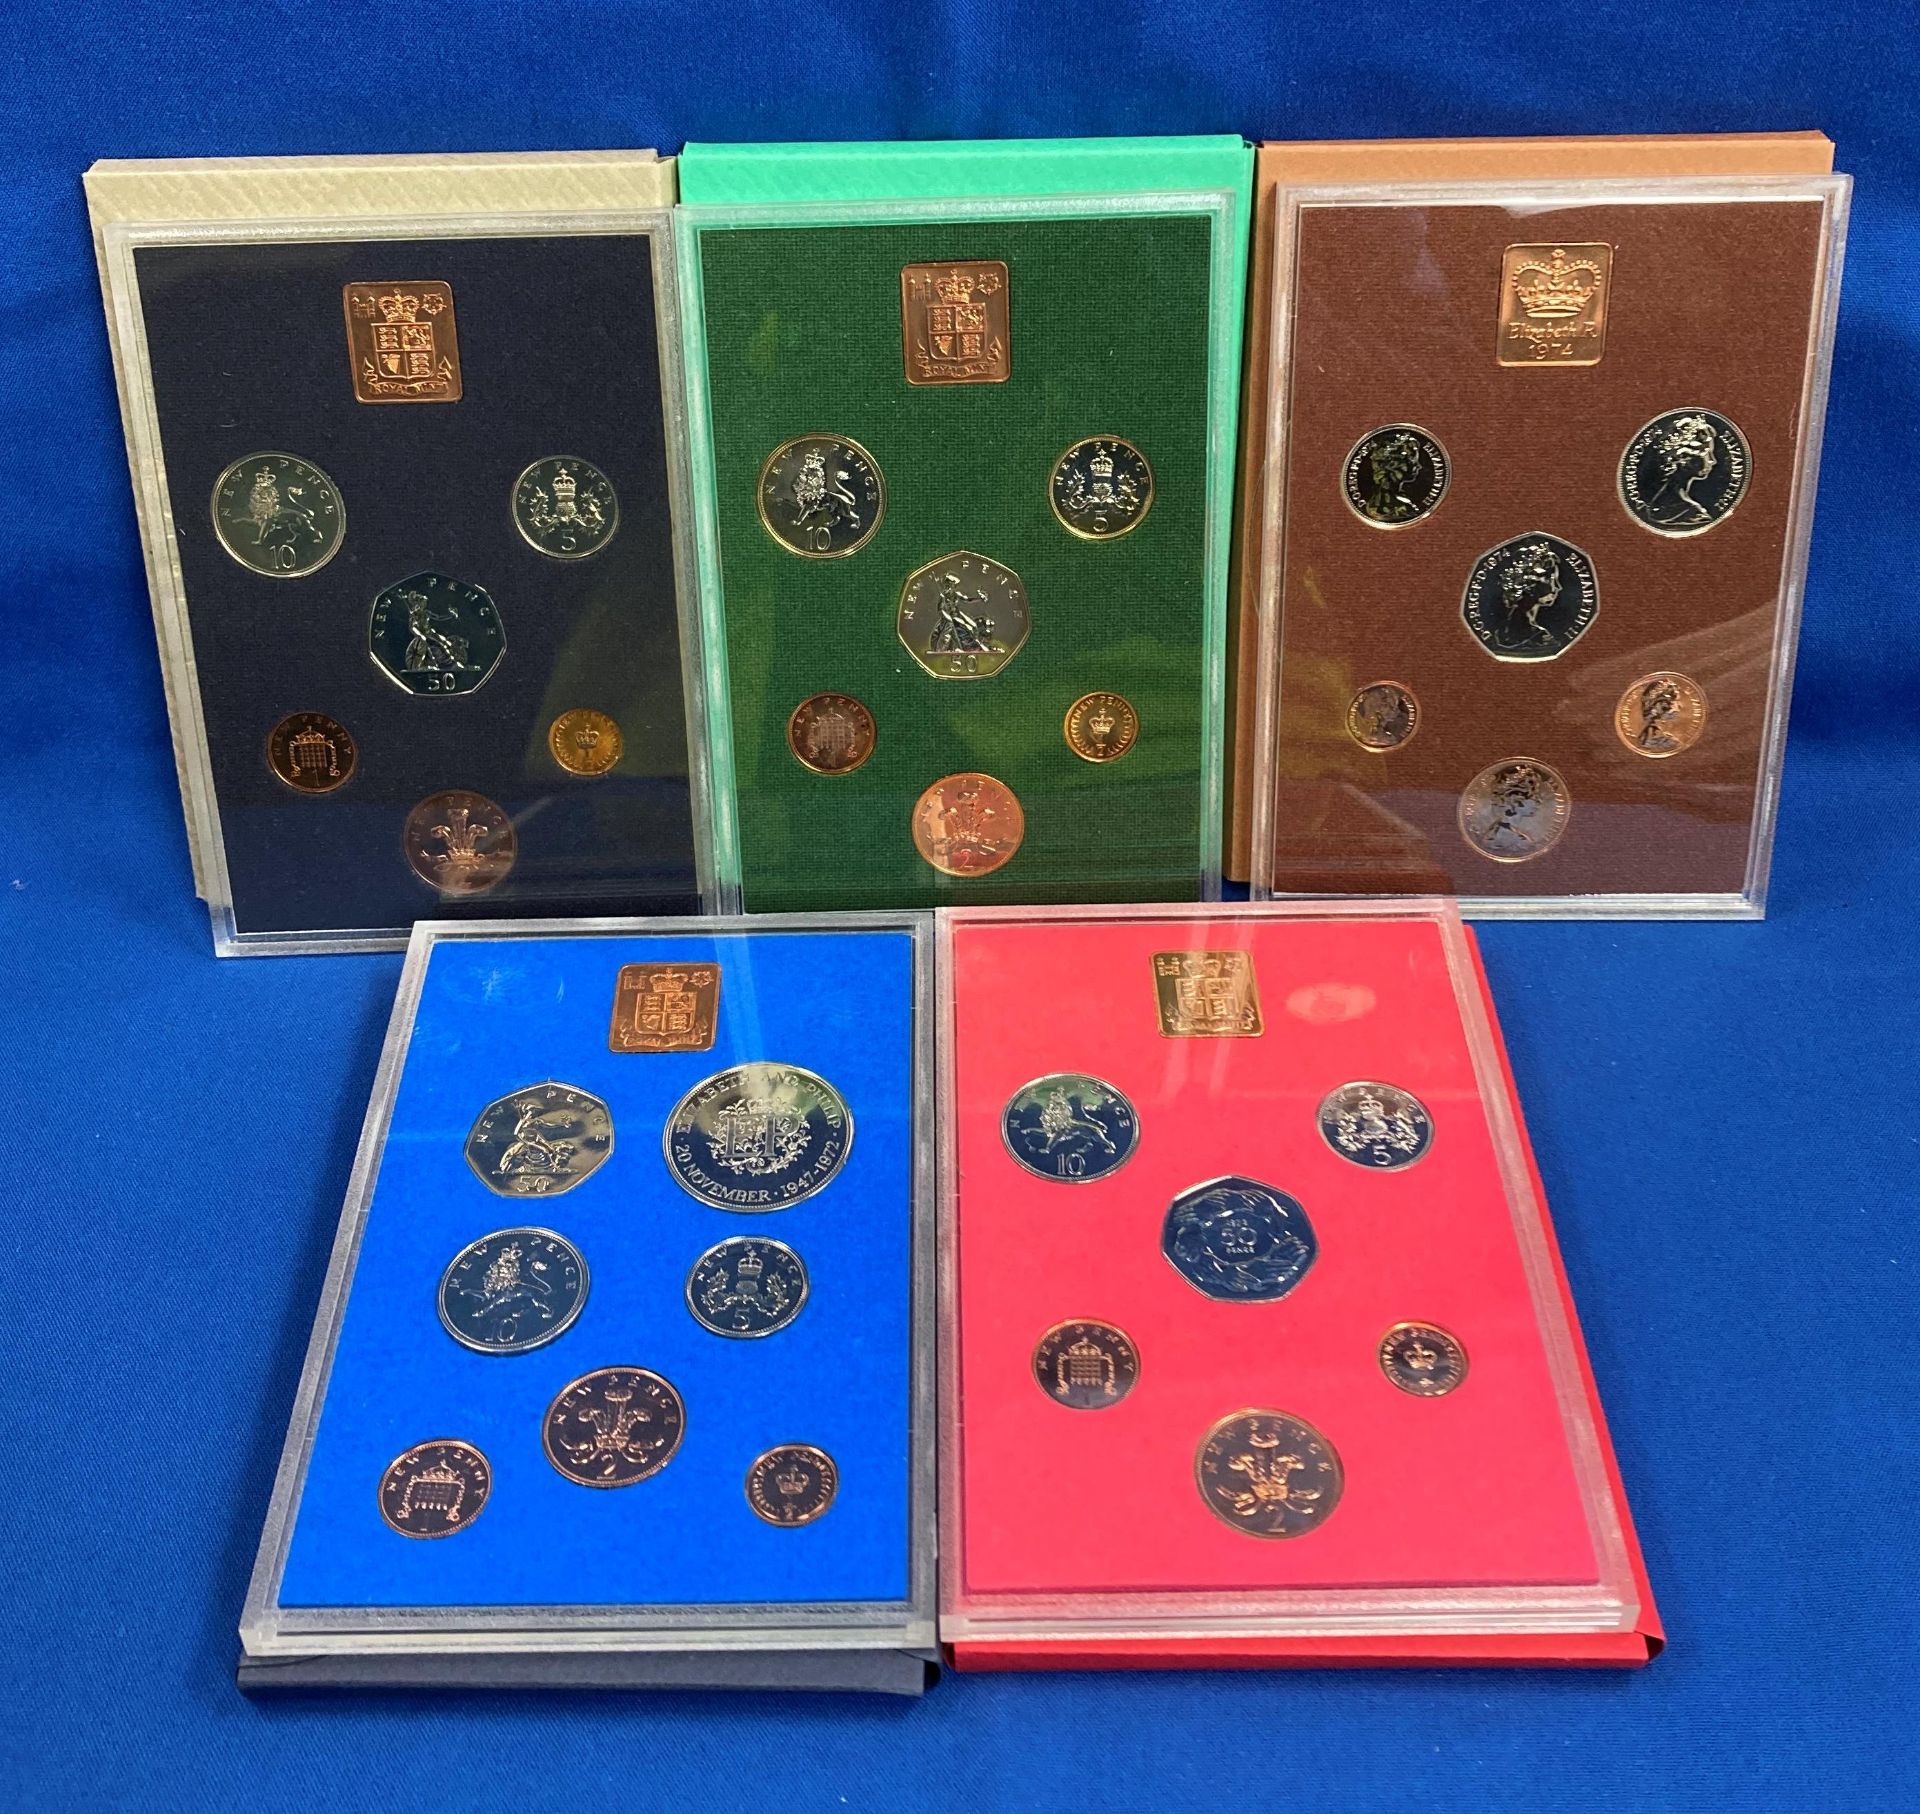 Five sets of Royal Mint 1972-1976 Coinage of Great Britain & Northern Ireland (saleroom location: